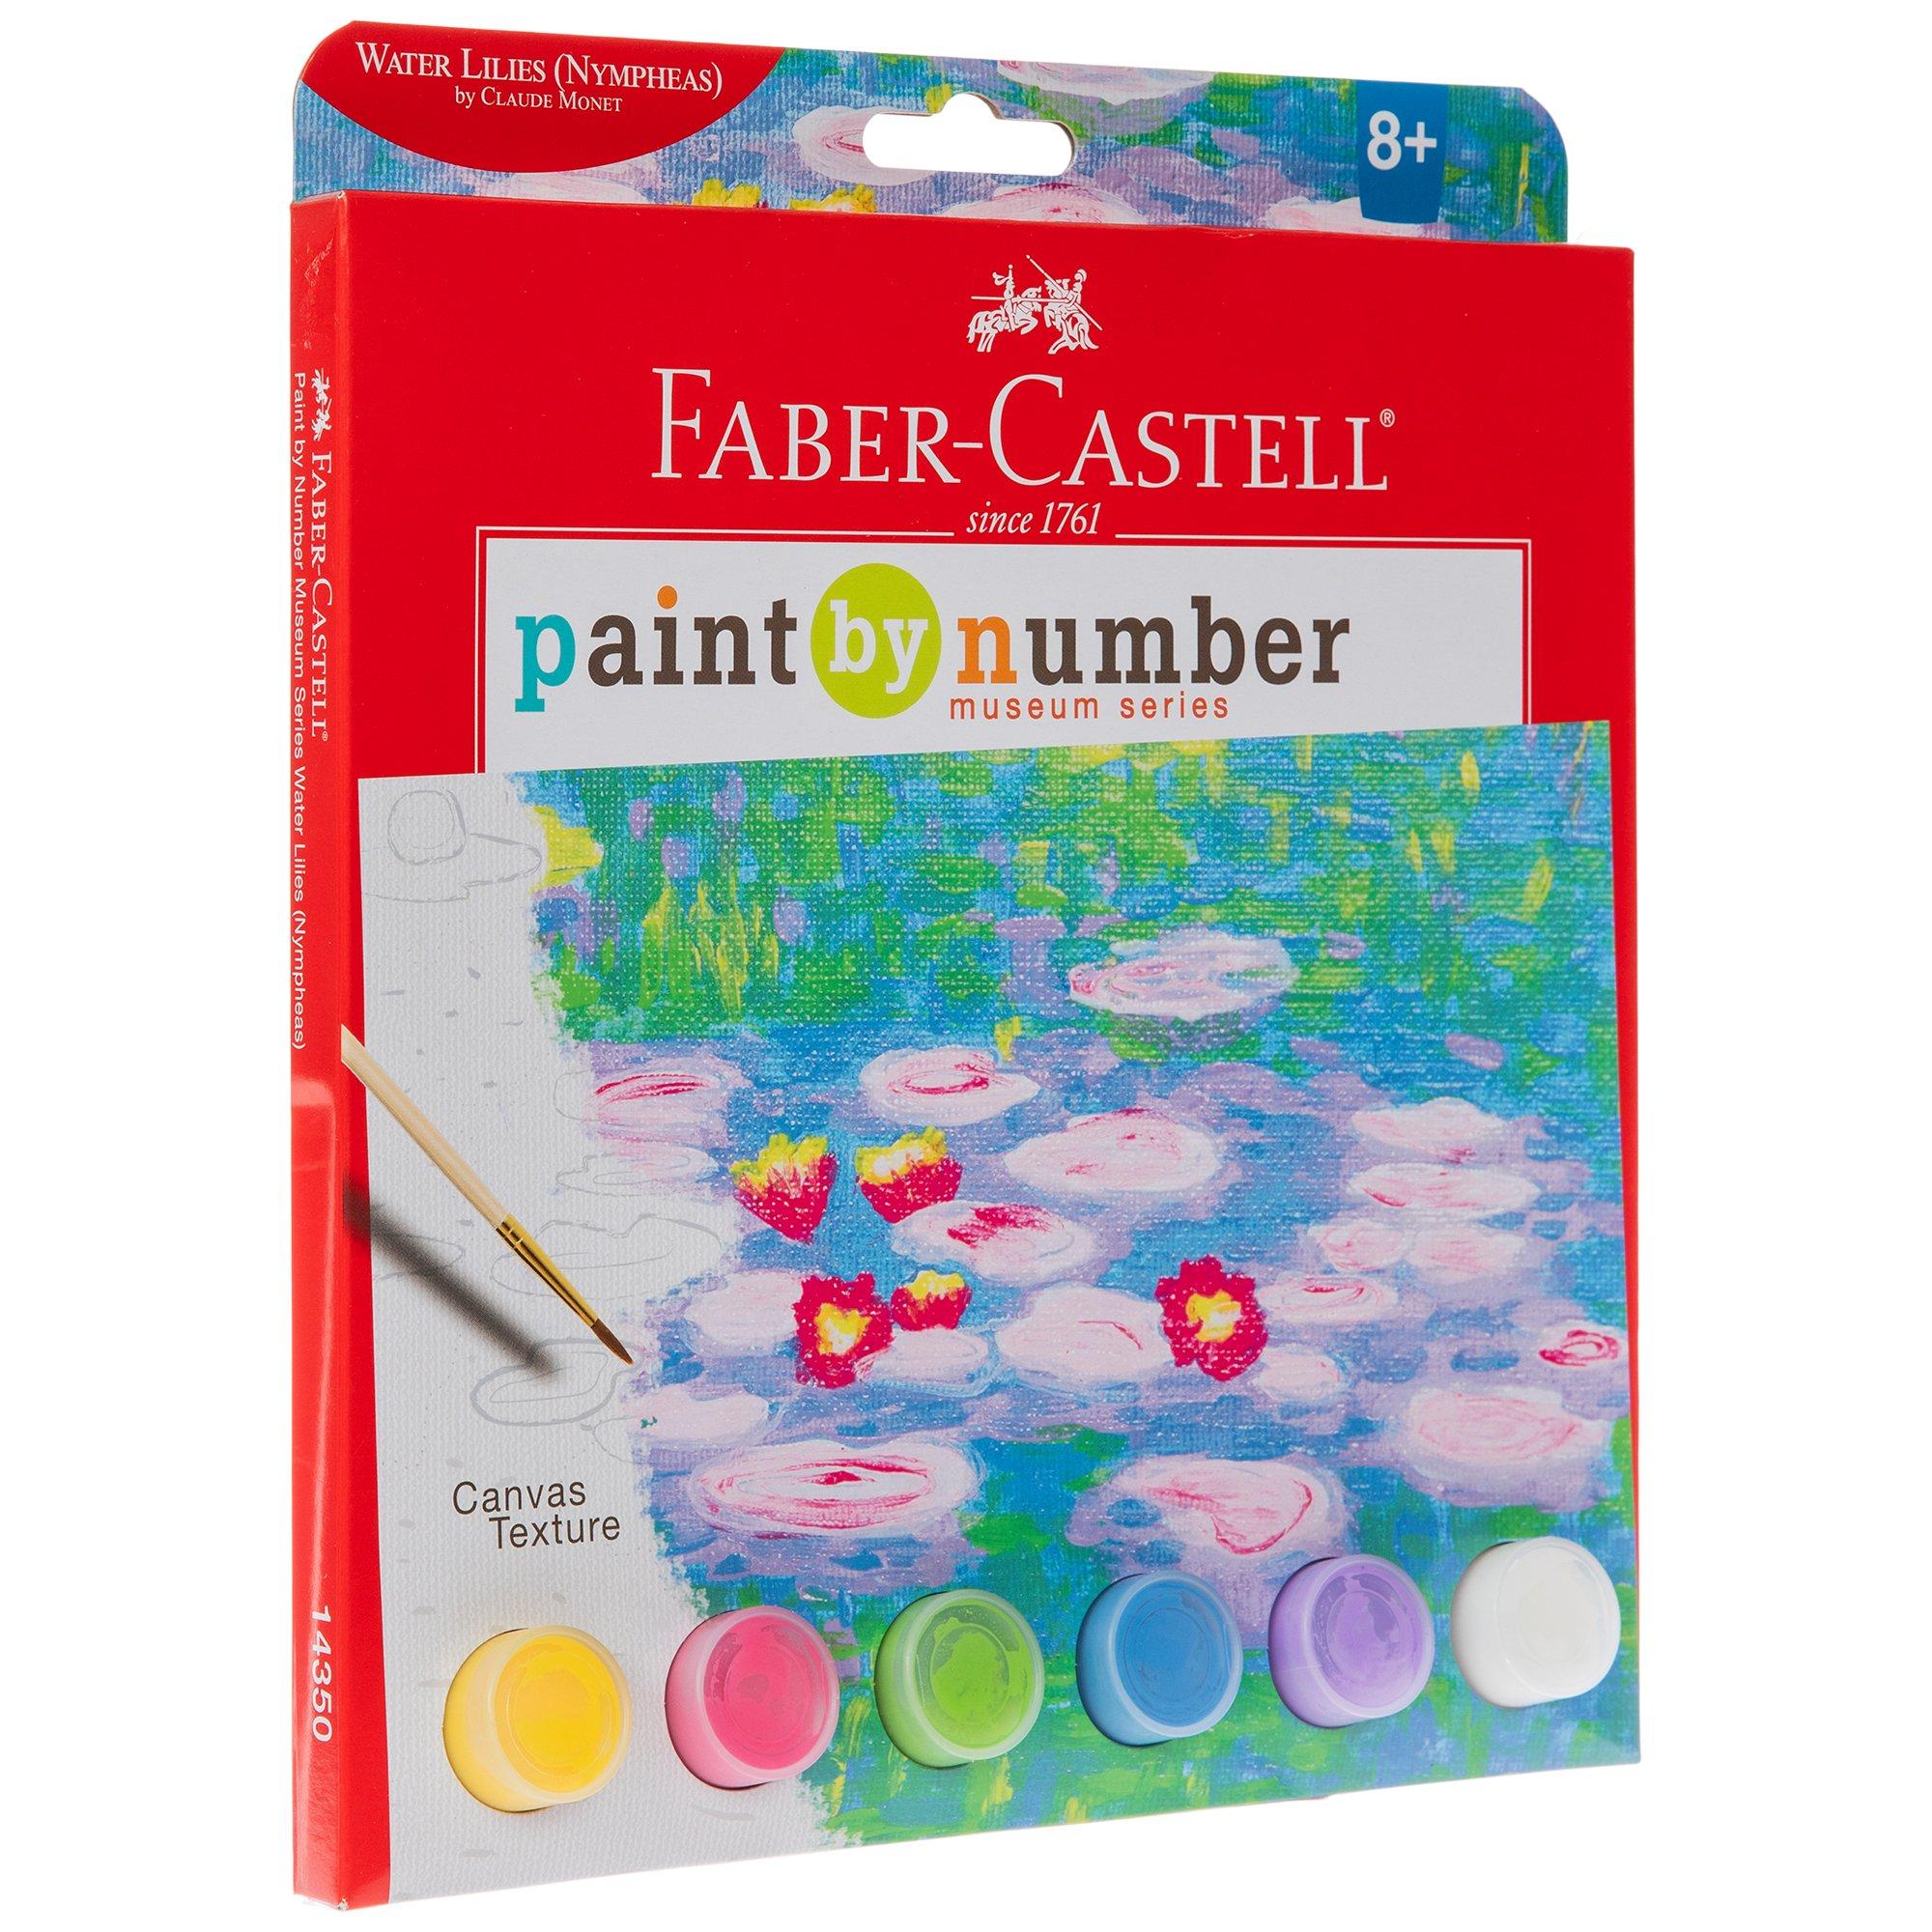 Faber-Castell Museum Series Paint by Numbers - Claude Monet Water